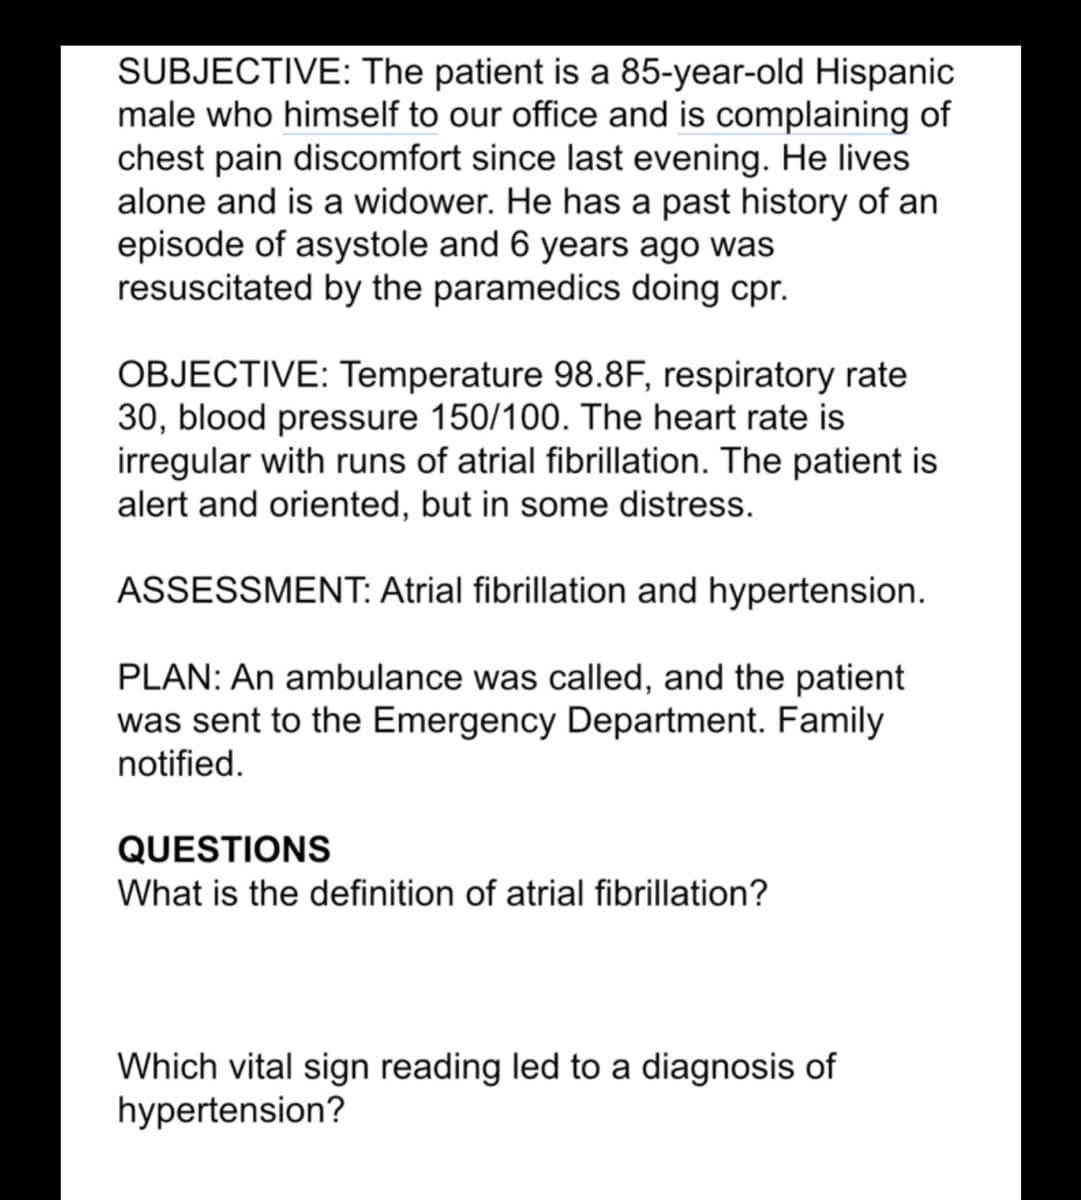 SUBJECTIVE: The patient is a 85-year-old Hispanic
male who himself to our office and is complaining of
chest pain discomfort since last evening. He lives
alone and is a widower. He has a past history of an
episode of asystole and 6 years ago was
resuscitated by the paramedics doing cpr.
OBJECTIVE: Temperature 98.8F, respiratory rate
30, blood pressure 150/100. The heart rate is
irregular with runs of atrial fibrillation. The patient is
alert and oriented, but in some distress.
ASSESSMENT: Atrial fibrillation and hypertension.
PLAN: An ambulance was called, and the patient
was sent to the Emergency Department. Family
notified.
QUESTIONS
What is the definition of atrial fibrillation?
Which vital sign reading led to a diagnosis of
hypertension?
